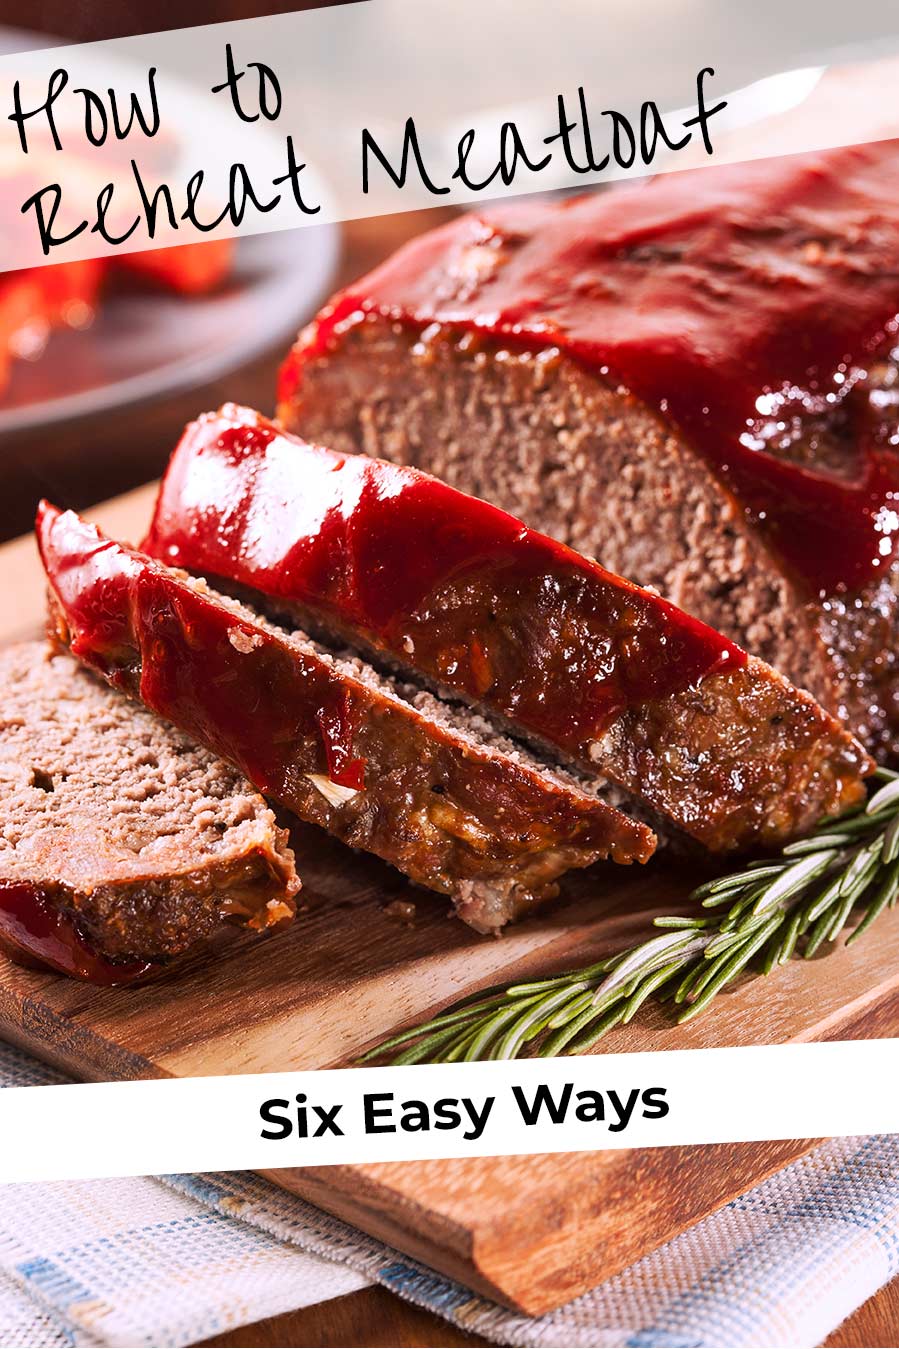 Pinterest image. Meatloaf picture with text overlay